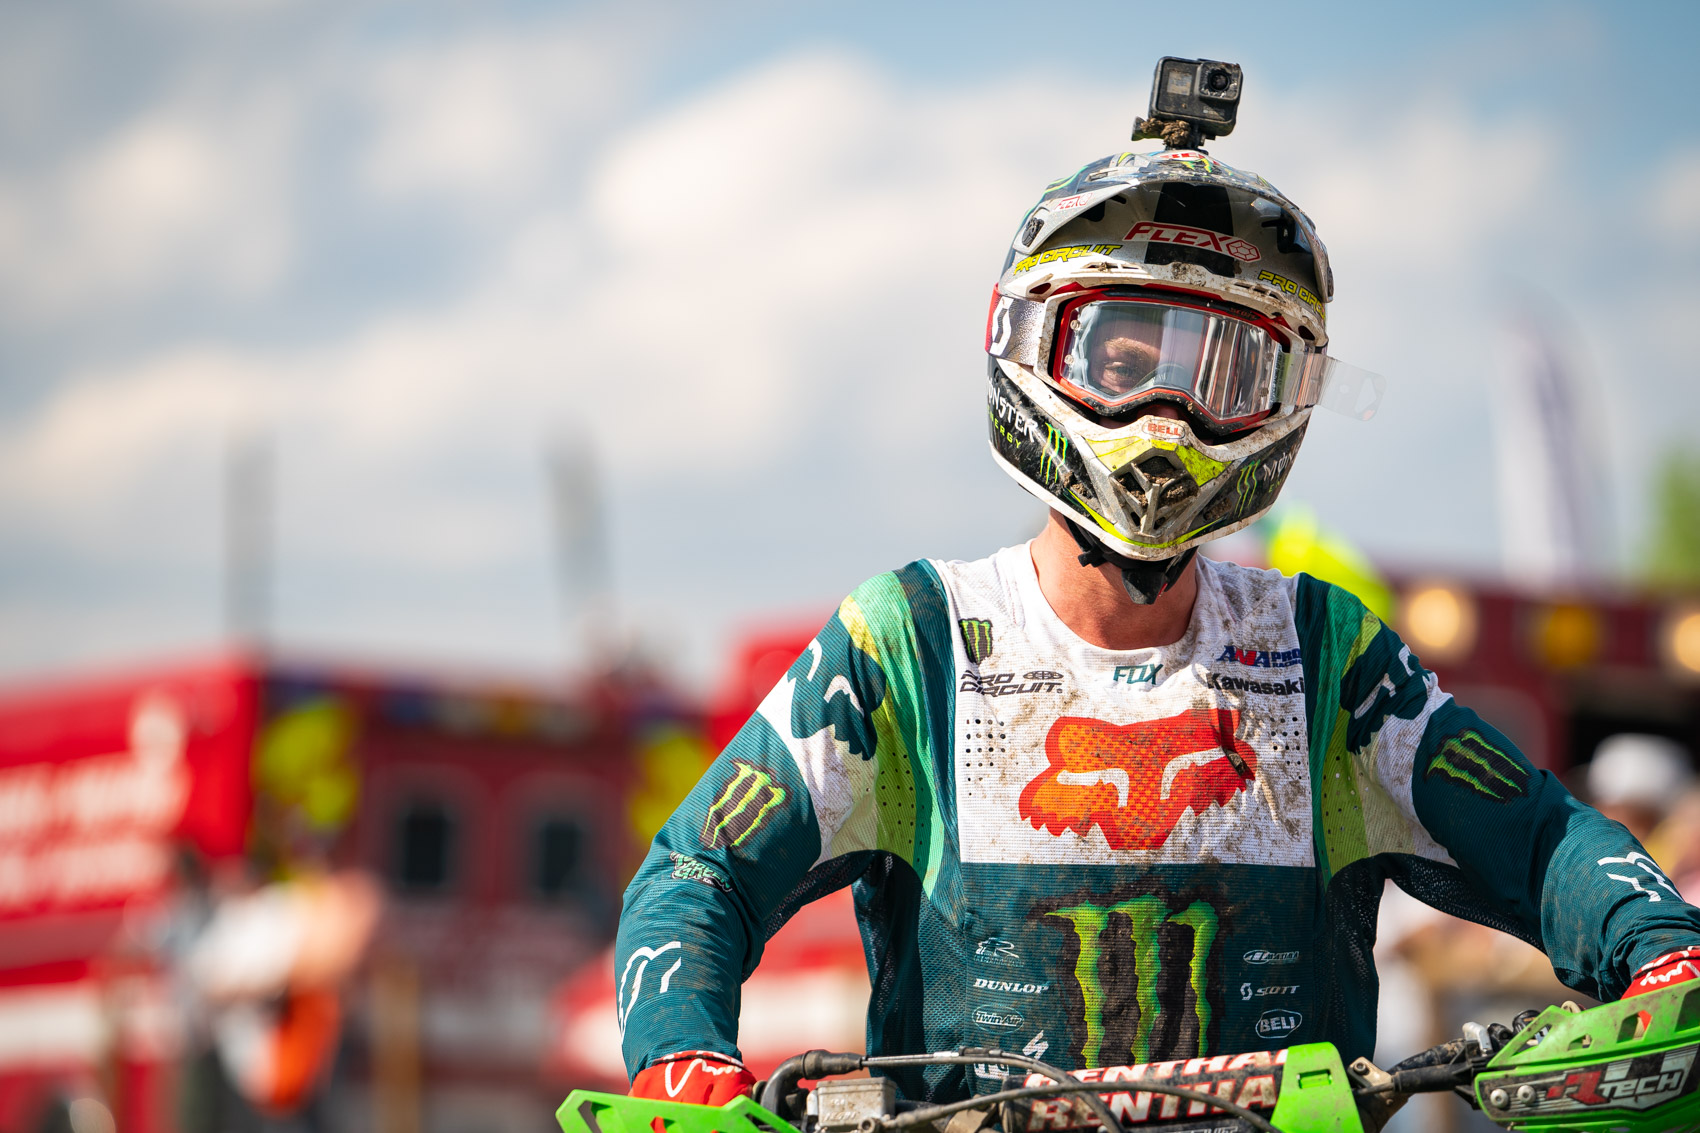 2019 Thunder Valley Motocross GoPro Videos and Analysis Swapmoto Live